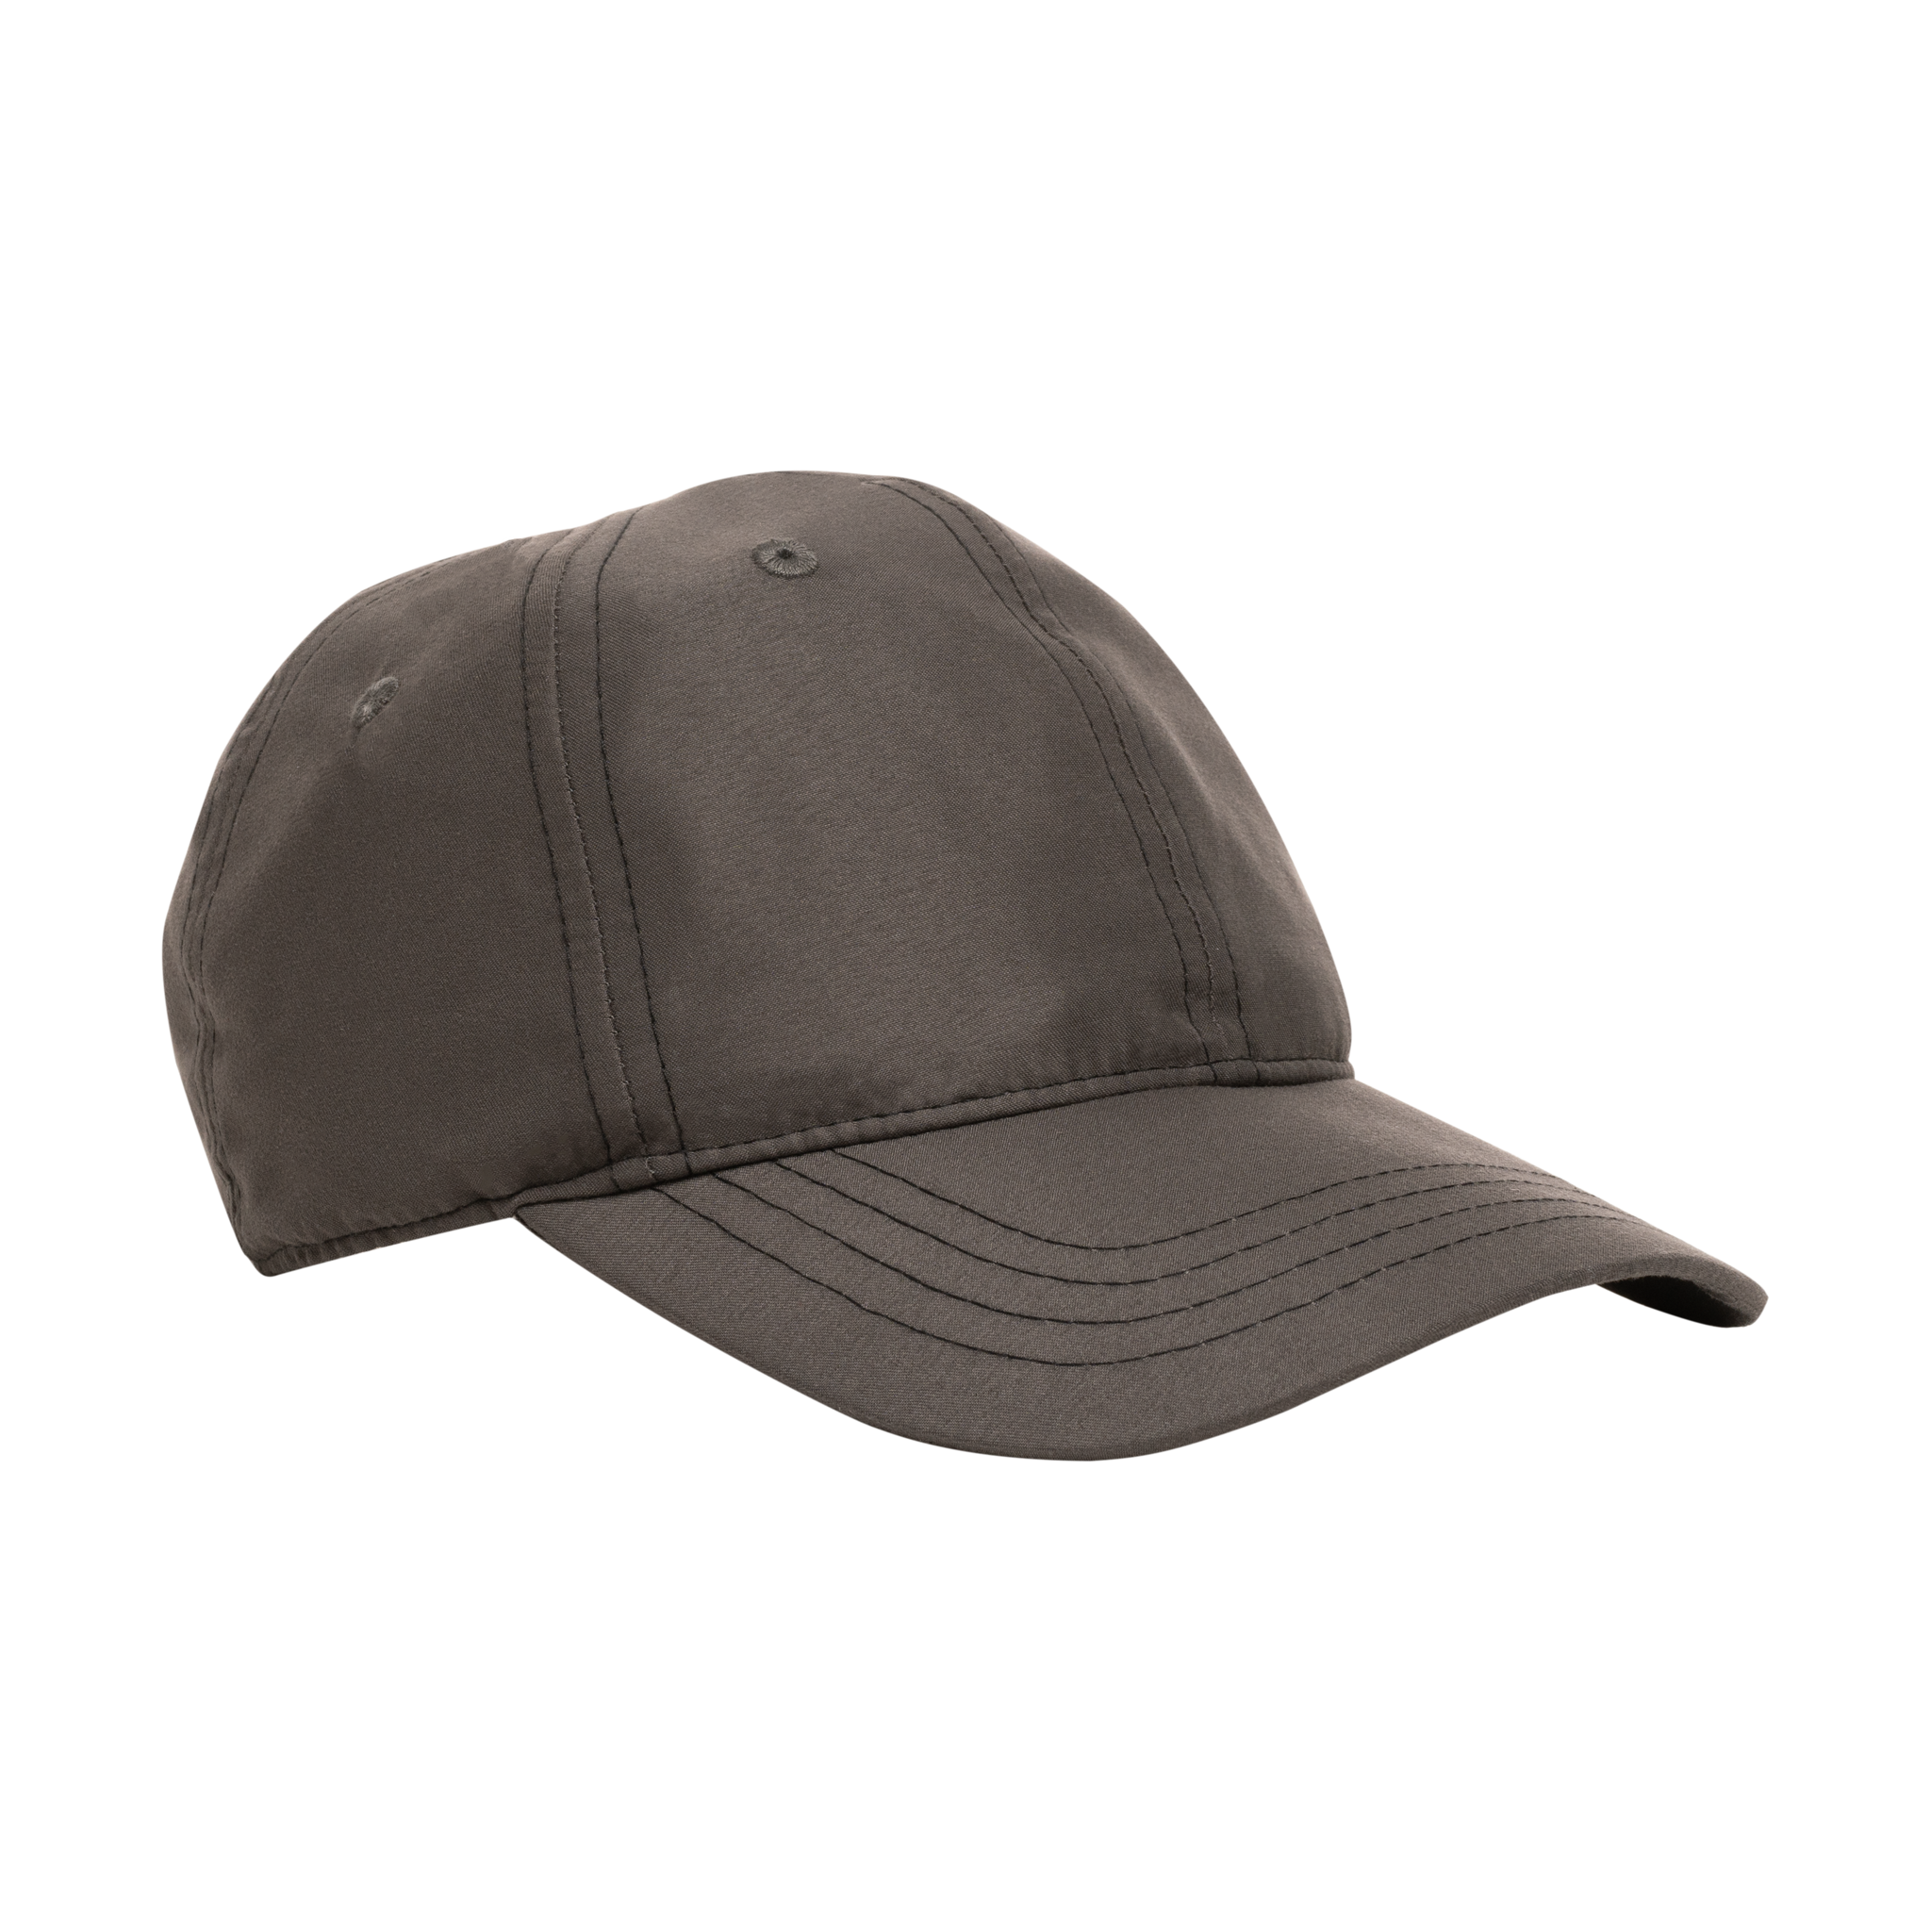 Performance Cooling Baseball Cap with HydroSnap Fabric